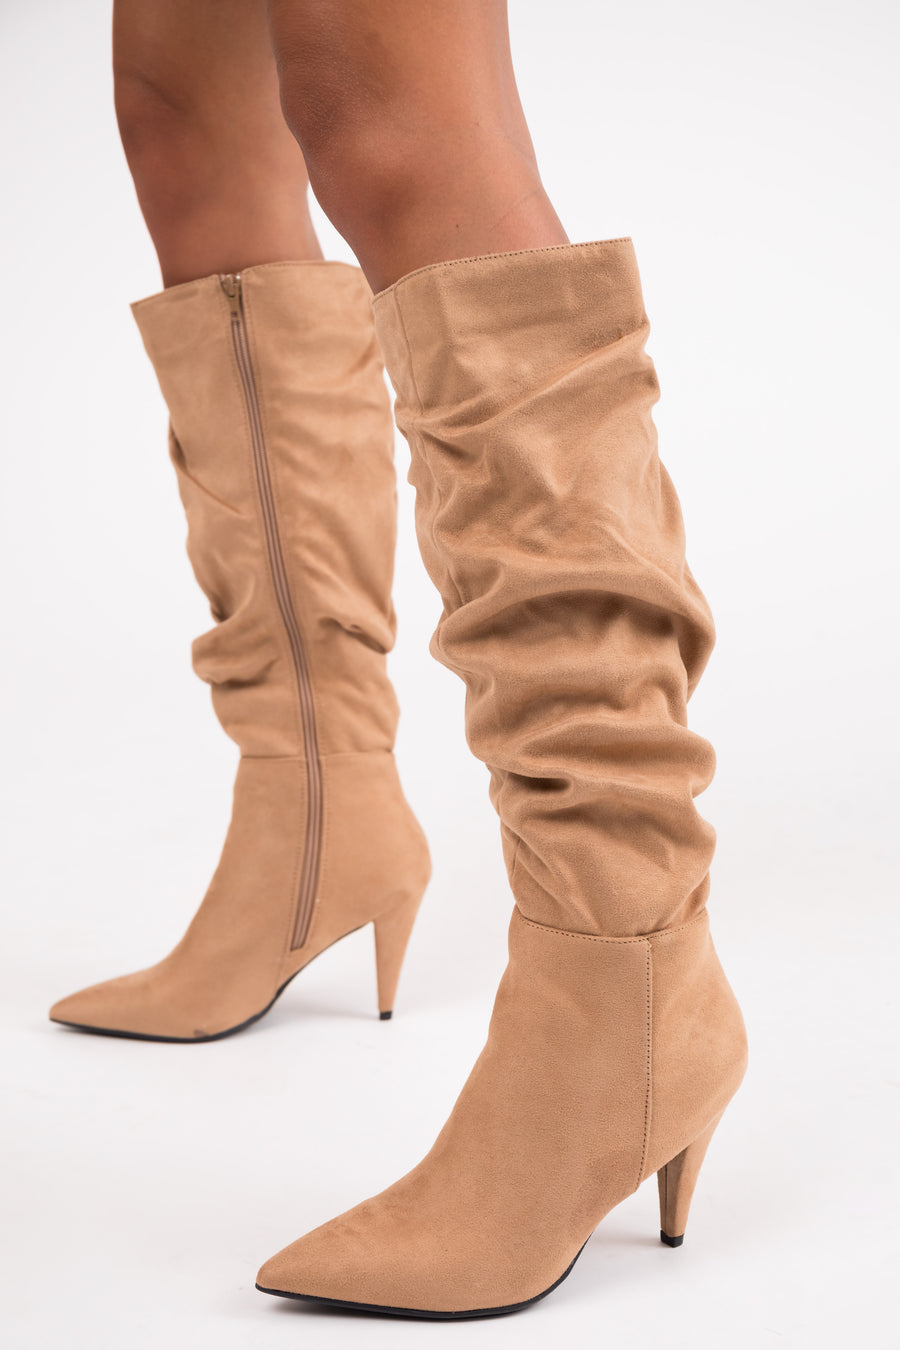 Camel Slouchy Side Zip Up Pointed Heel Boots